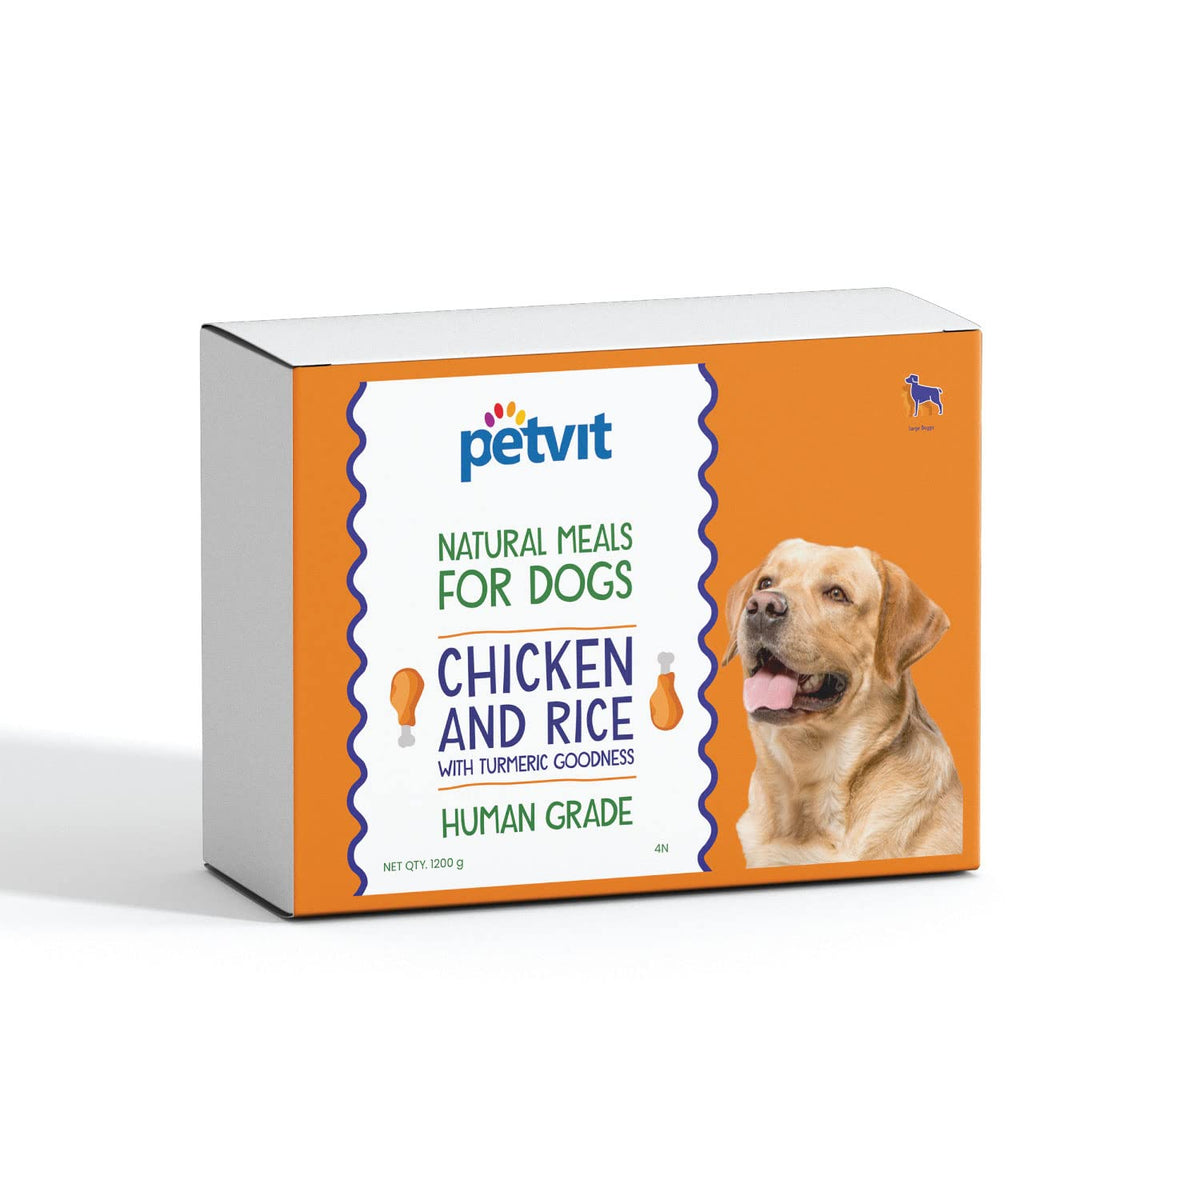 Petvit Natural Meal for Dogs - Chicken Rice with Turmeric (4 Pack, 300g Each) - Healthy and Nutritious Dog Food